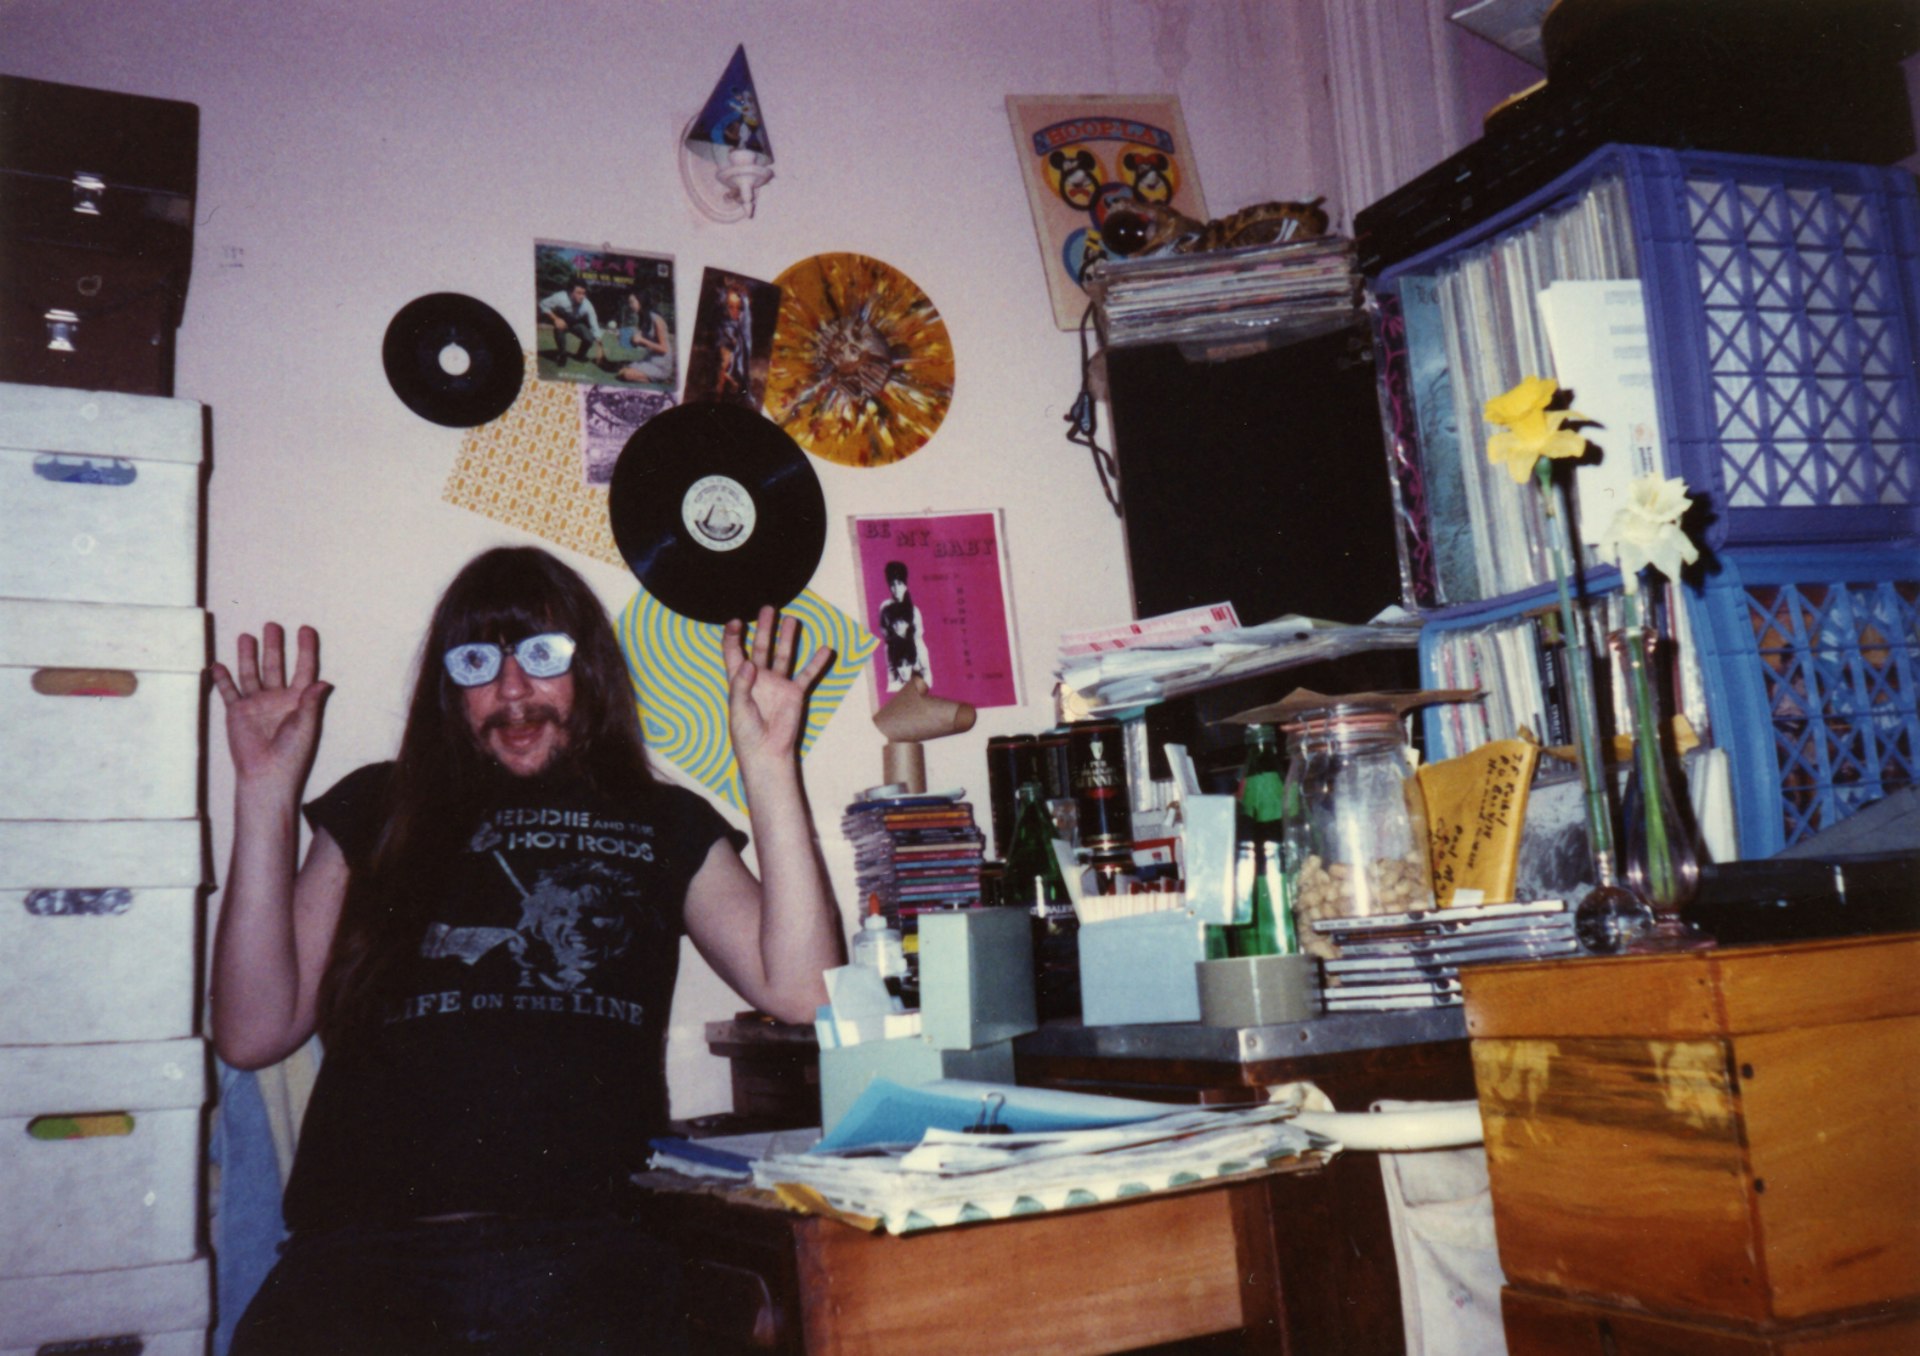 Psychedelia supremo Paul Major is the undisputed father of record collecting